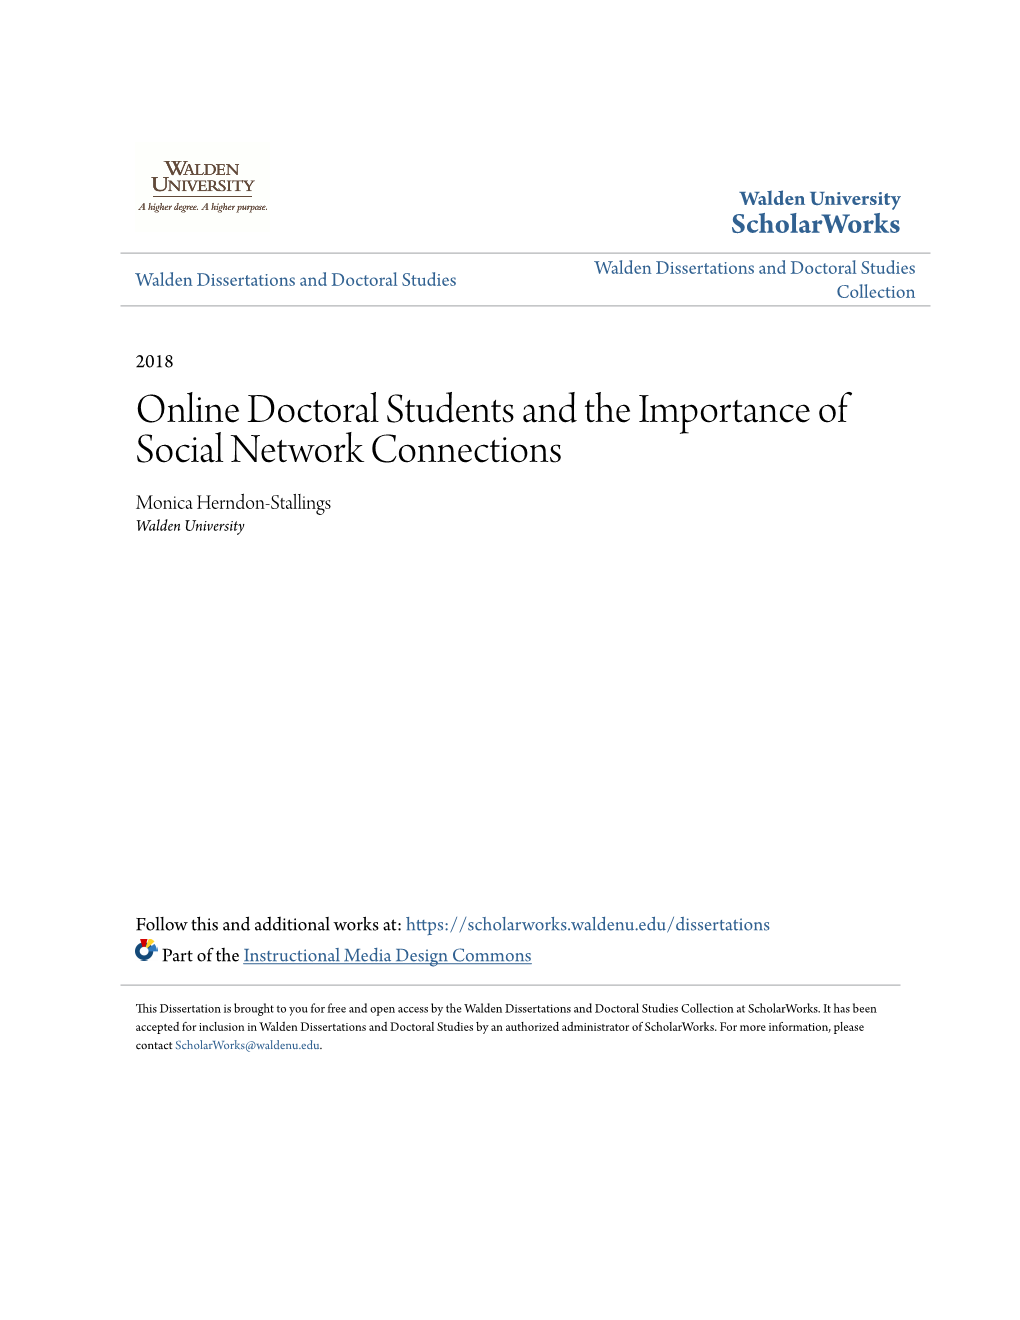 Online Doctoral Students and the Importance of Social Network Connections Monica Herndon-Stallings Walden University